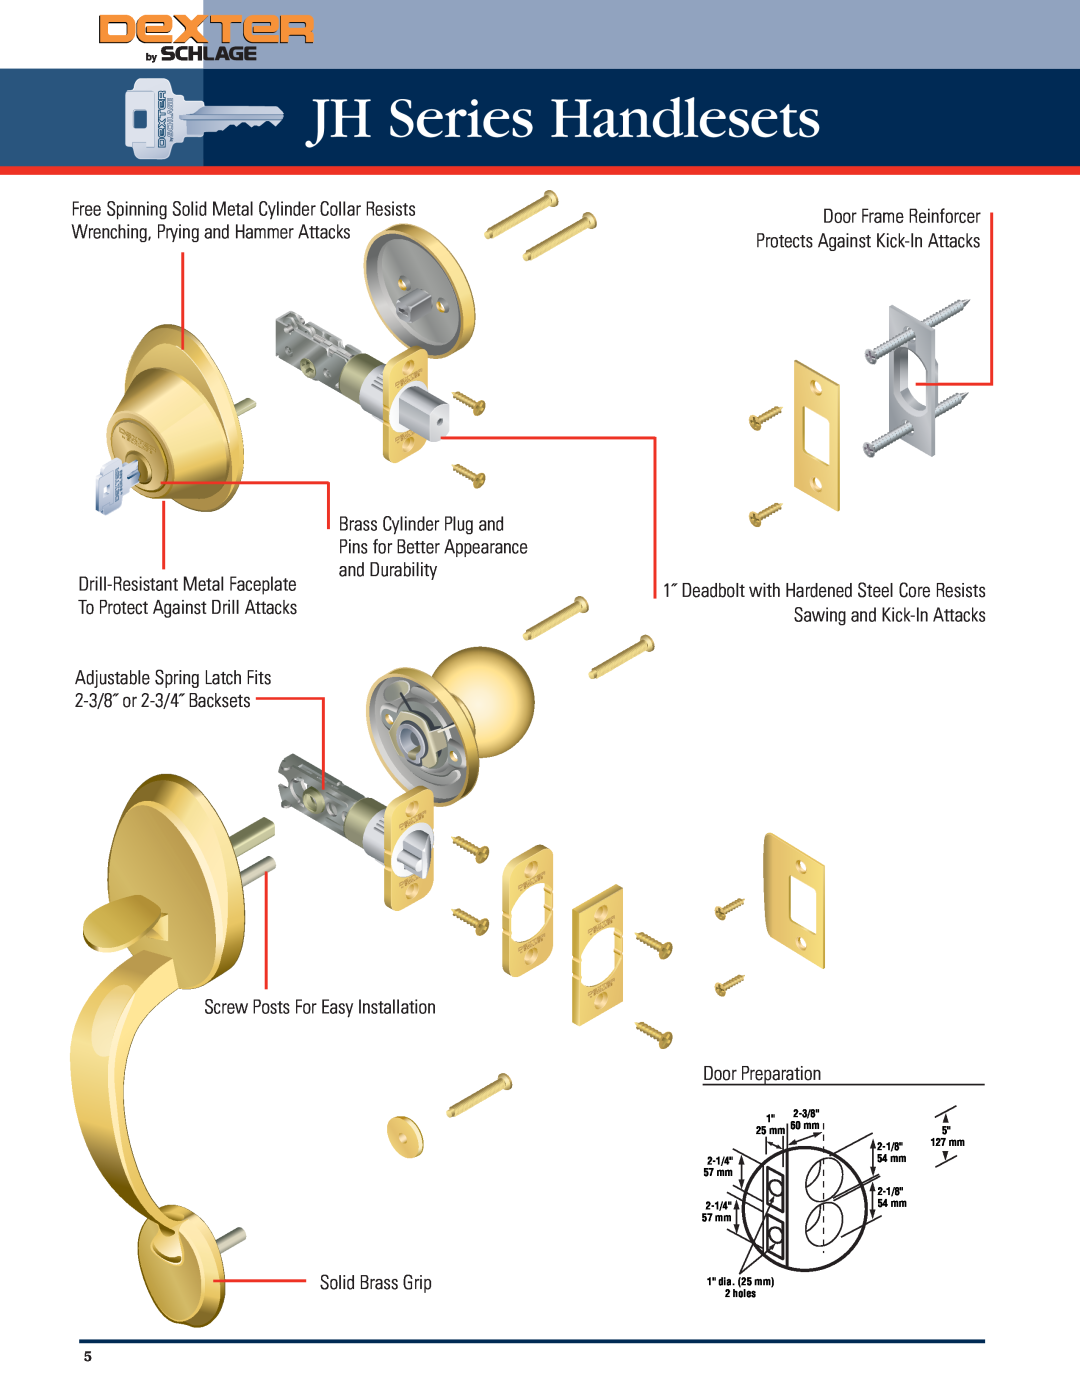 Schlage Residential Lock manual JH Series Handlesets, Door Frame Reinforcer, and Durability Drill-Resistant Metal Faceplate 